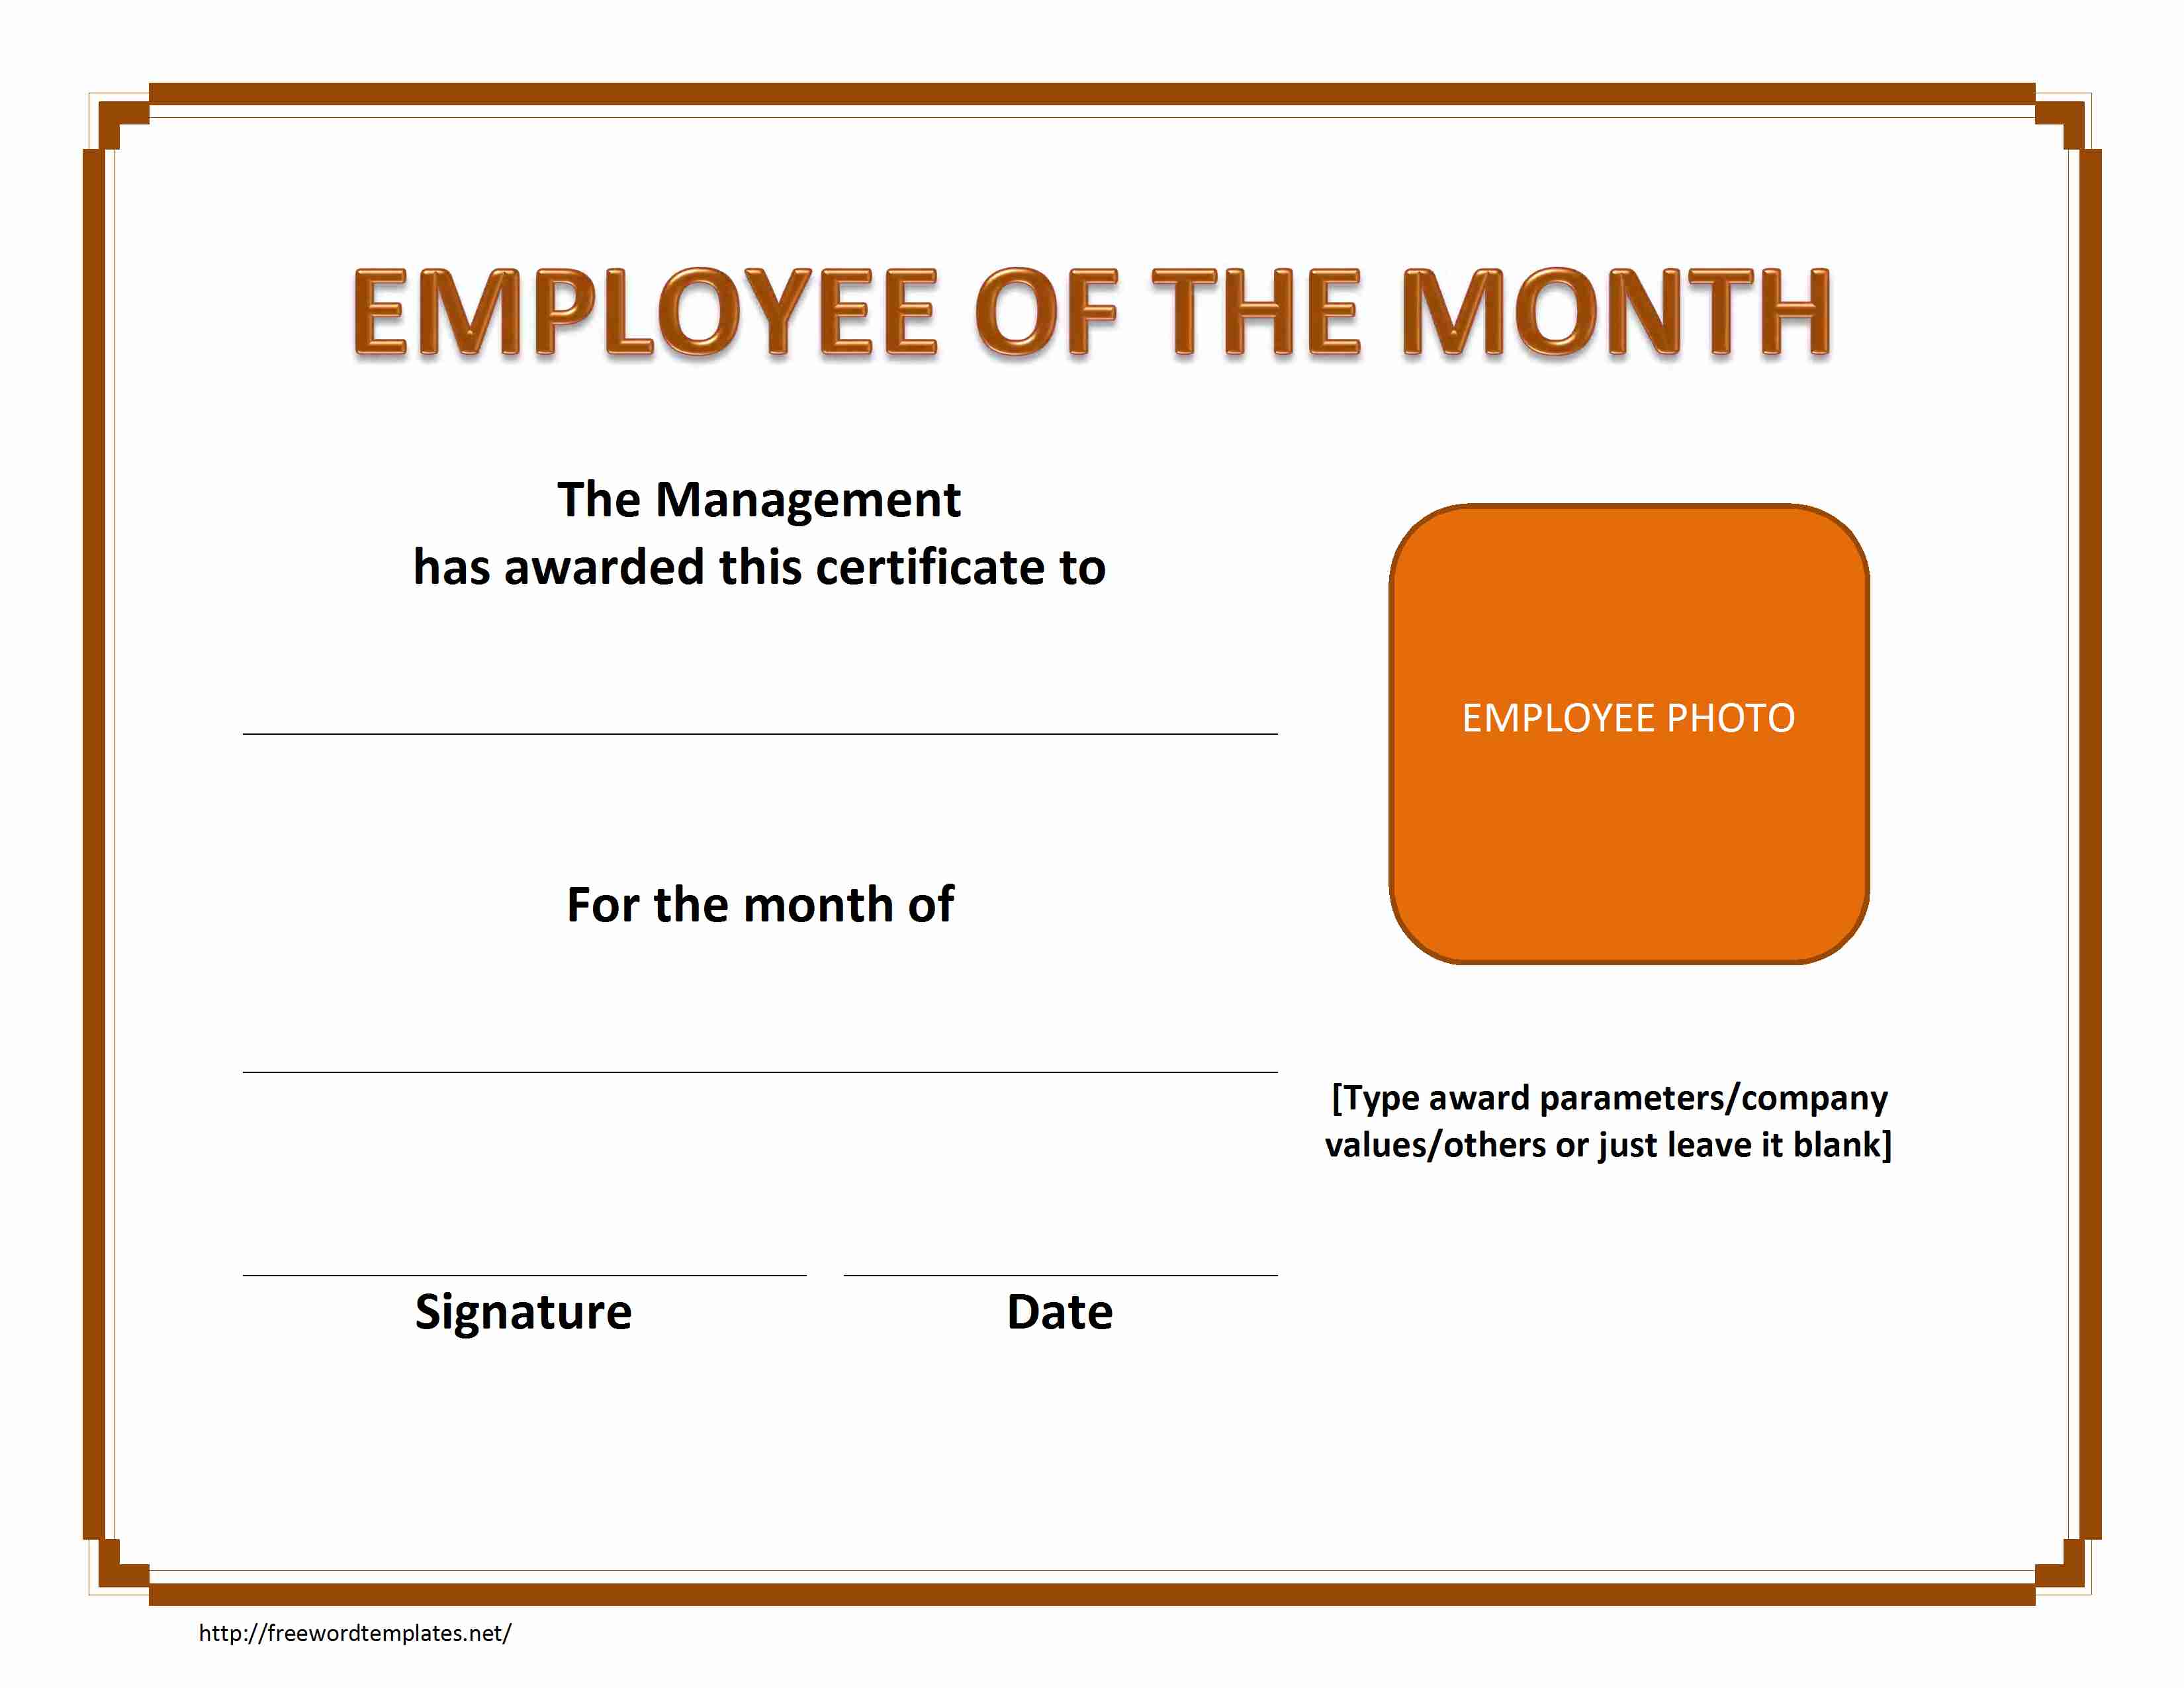 employee-of-the-month-certificate